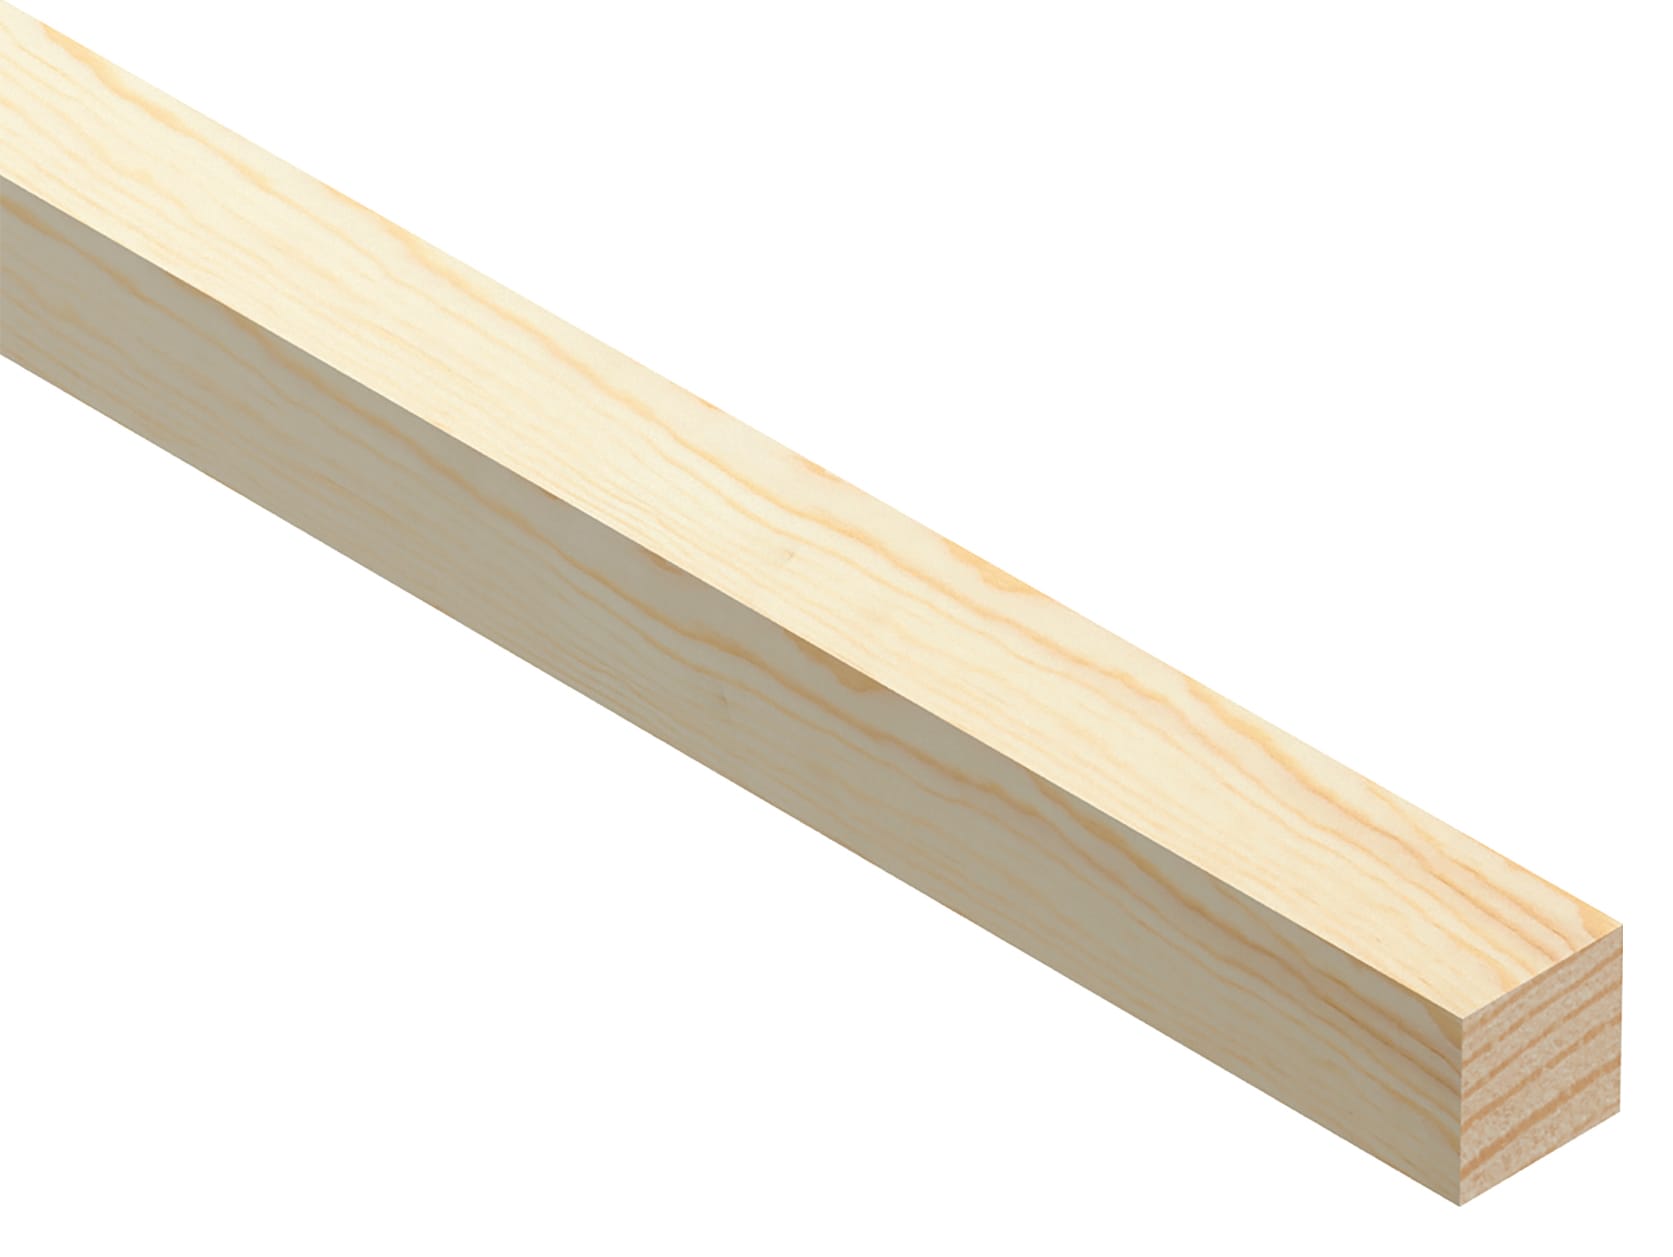 Cheshire Mouldings Pine Stripwood - 12 x 12